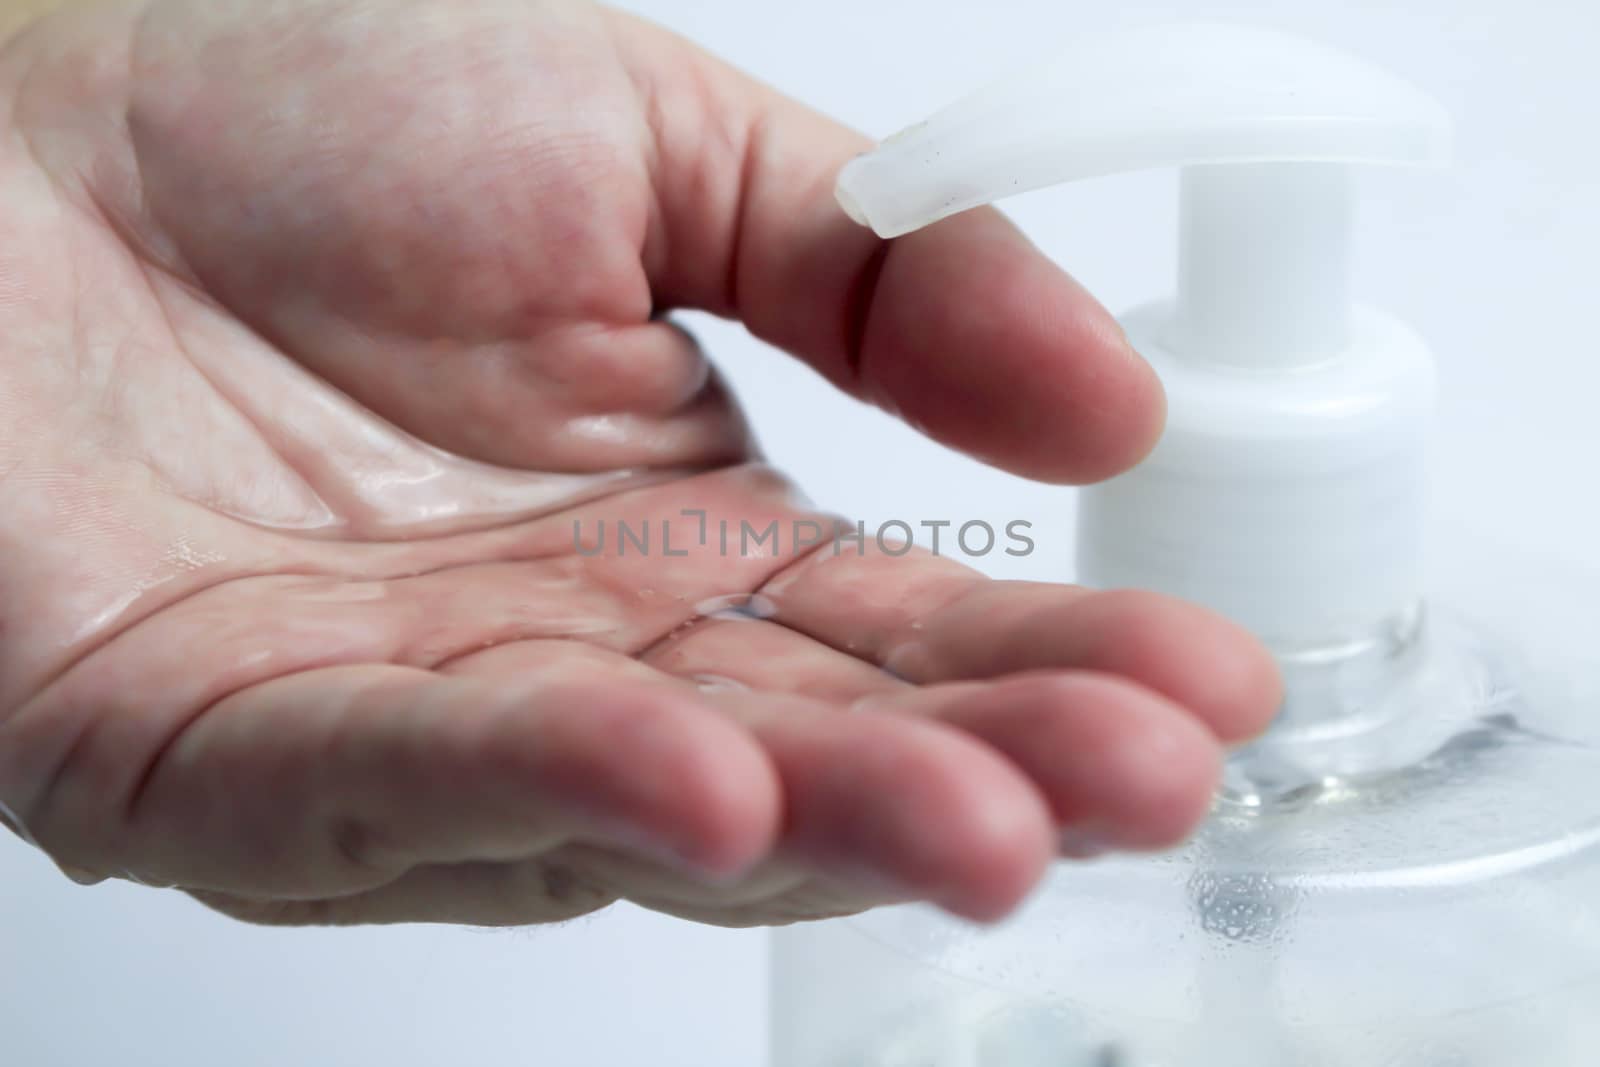 Hydroalcoholic gel bottle pouring gel into a hand by soniabonet